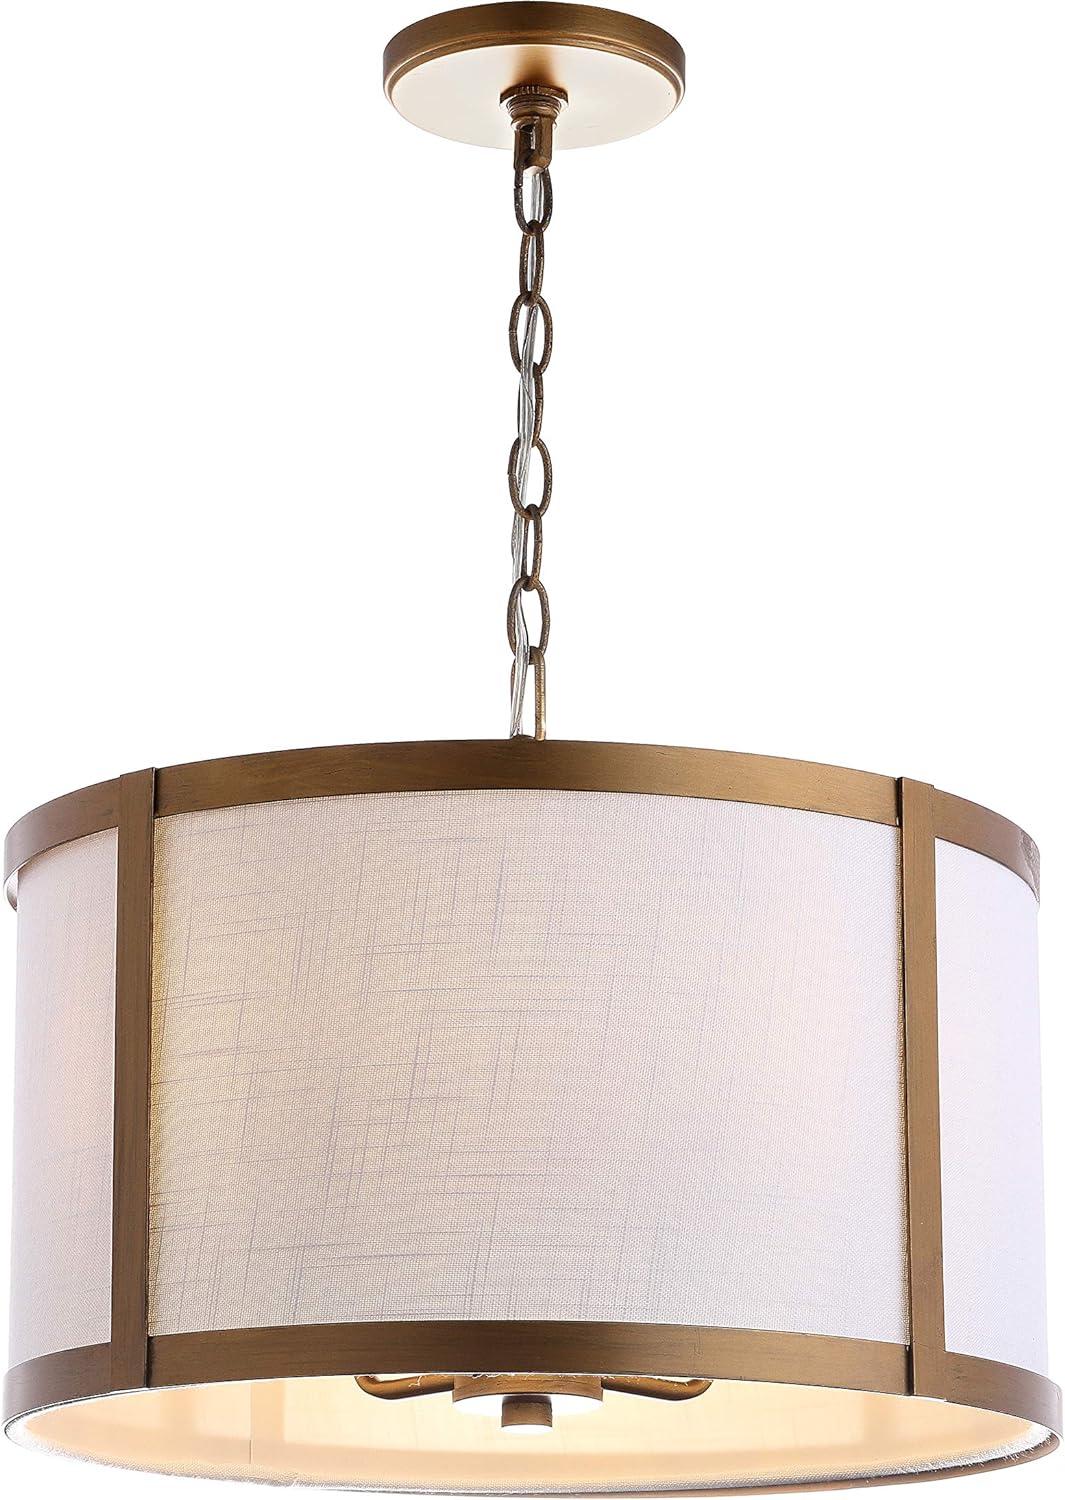 Thatcher Transitional LED Drum Pendant Light - Gold and White